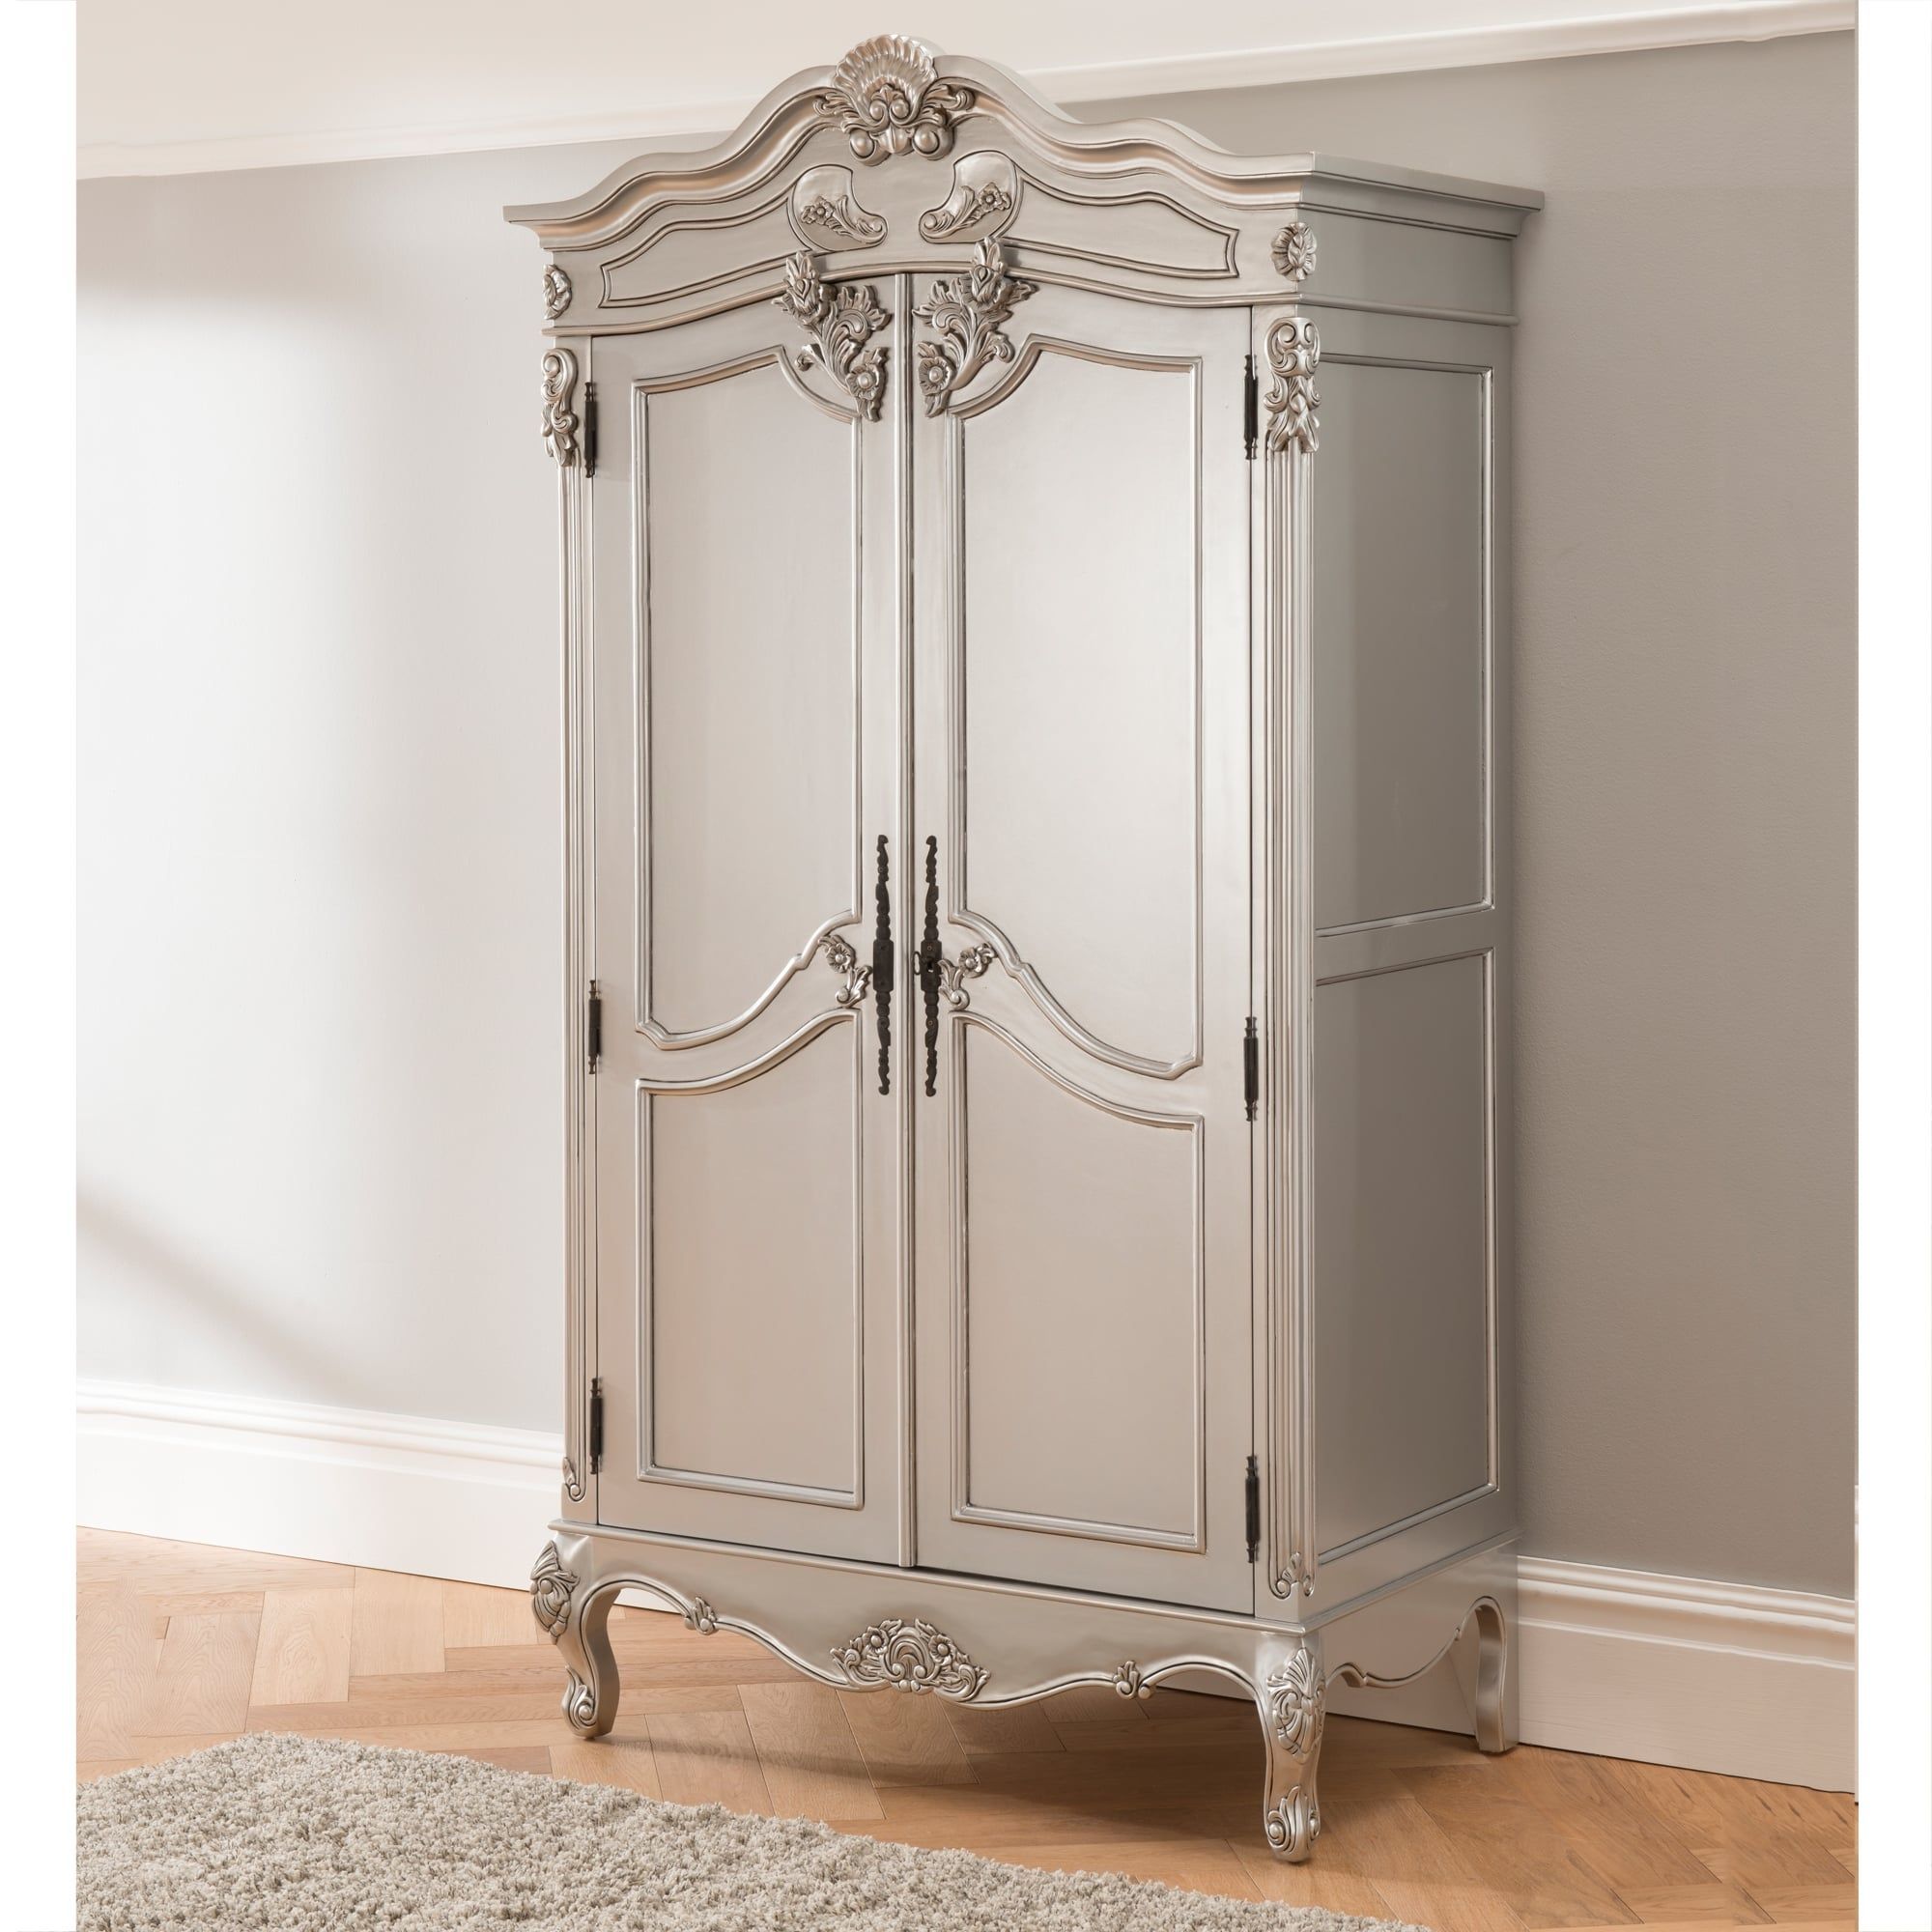 Baroque Antique French Style Wardrobe | Shabby Chic Wardrobe, French  Antiques, French Furniture Bedroom Intended For Shabby Chic Wardrobes (Photo 13 of 15)